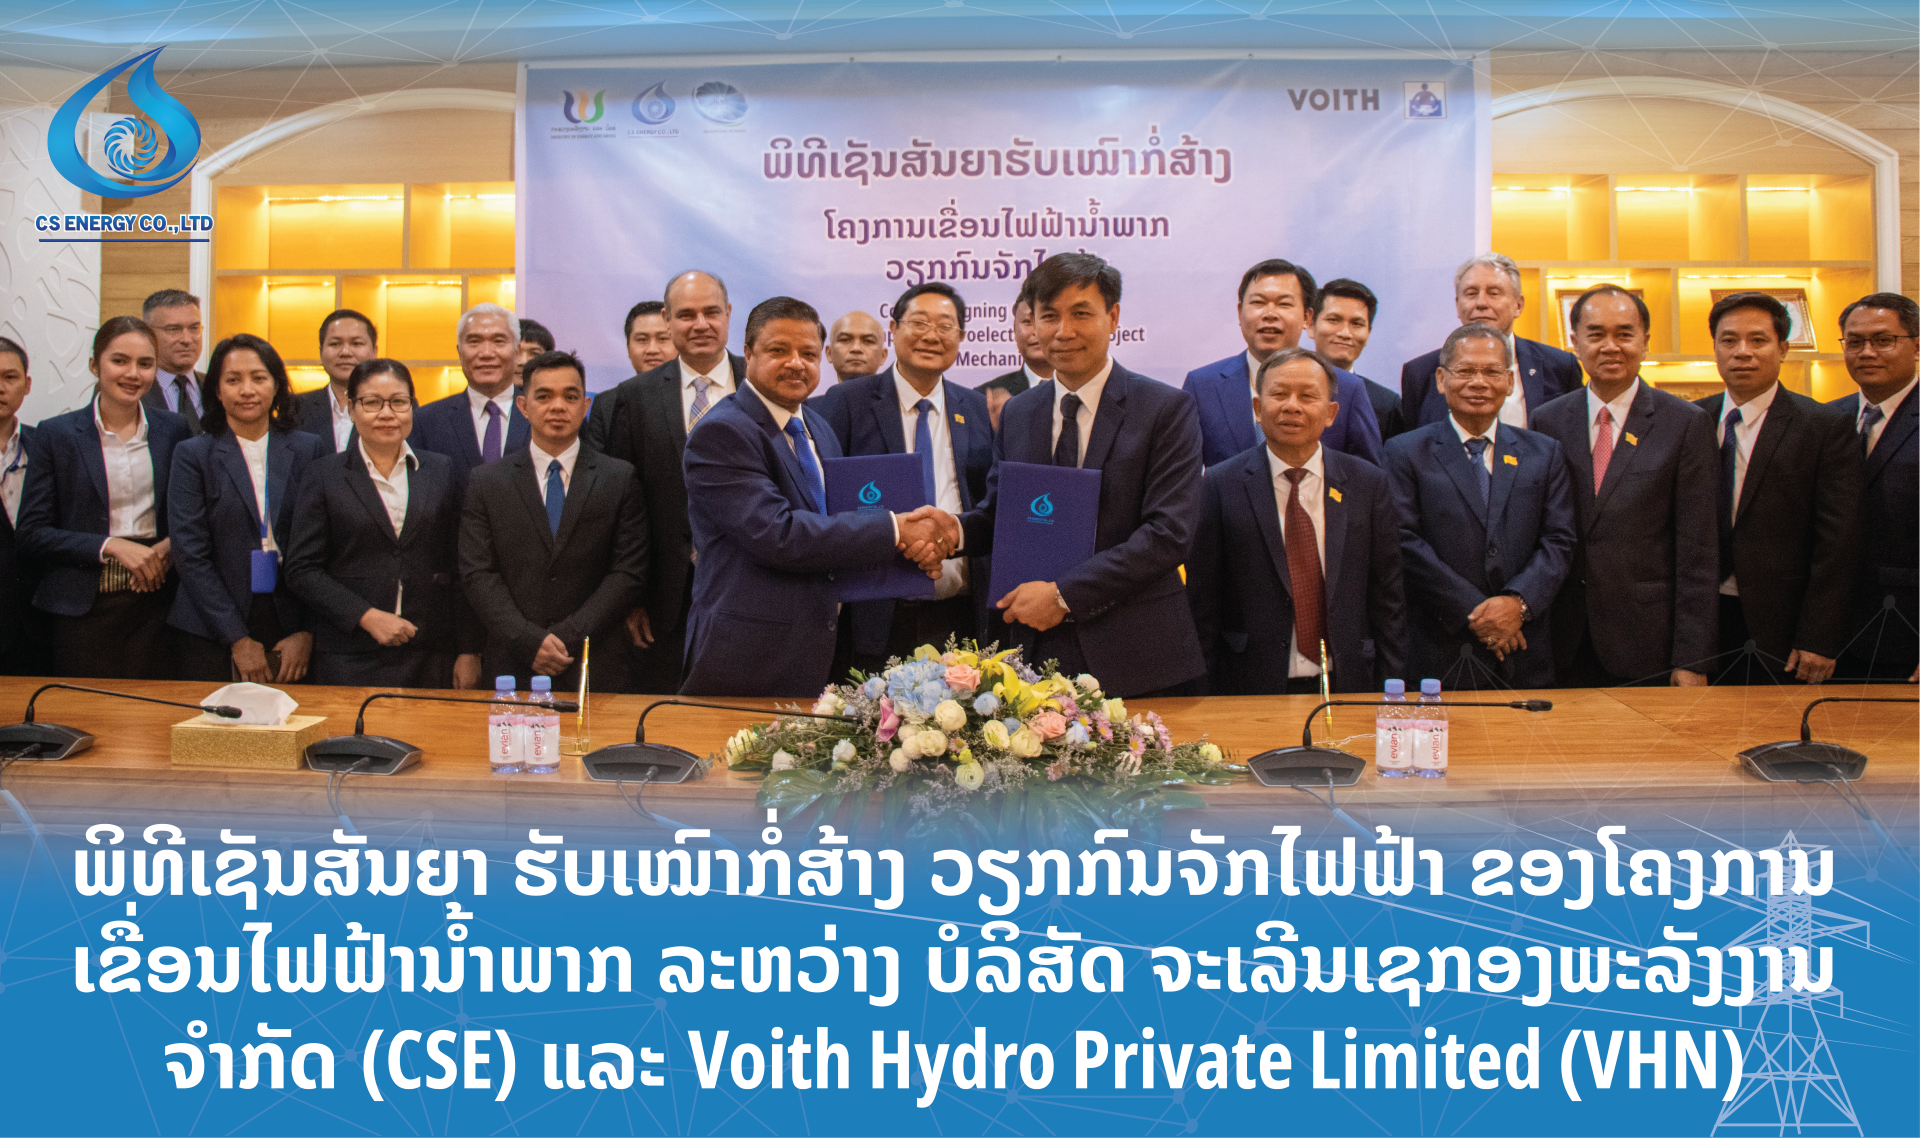 Contract Agreement Signing Ceremony for Electric mechanical of Namphak Hydropower Plants between Chaluen Sekong Energy Co., Ltd (CSE) and Voith Hydro Private Limited (VHN)